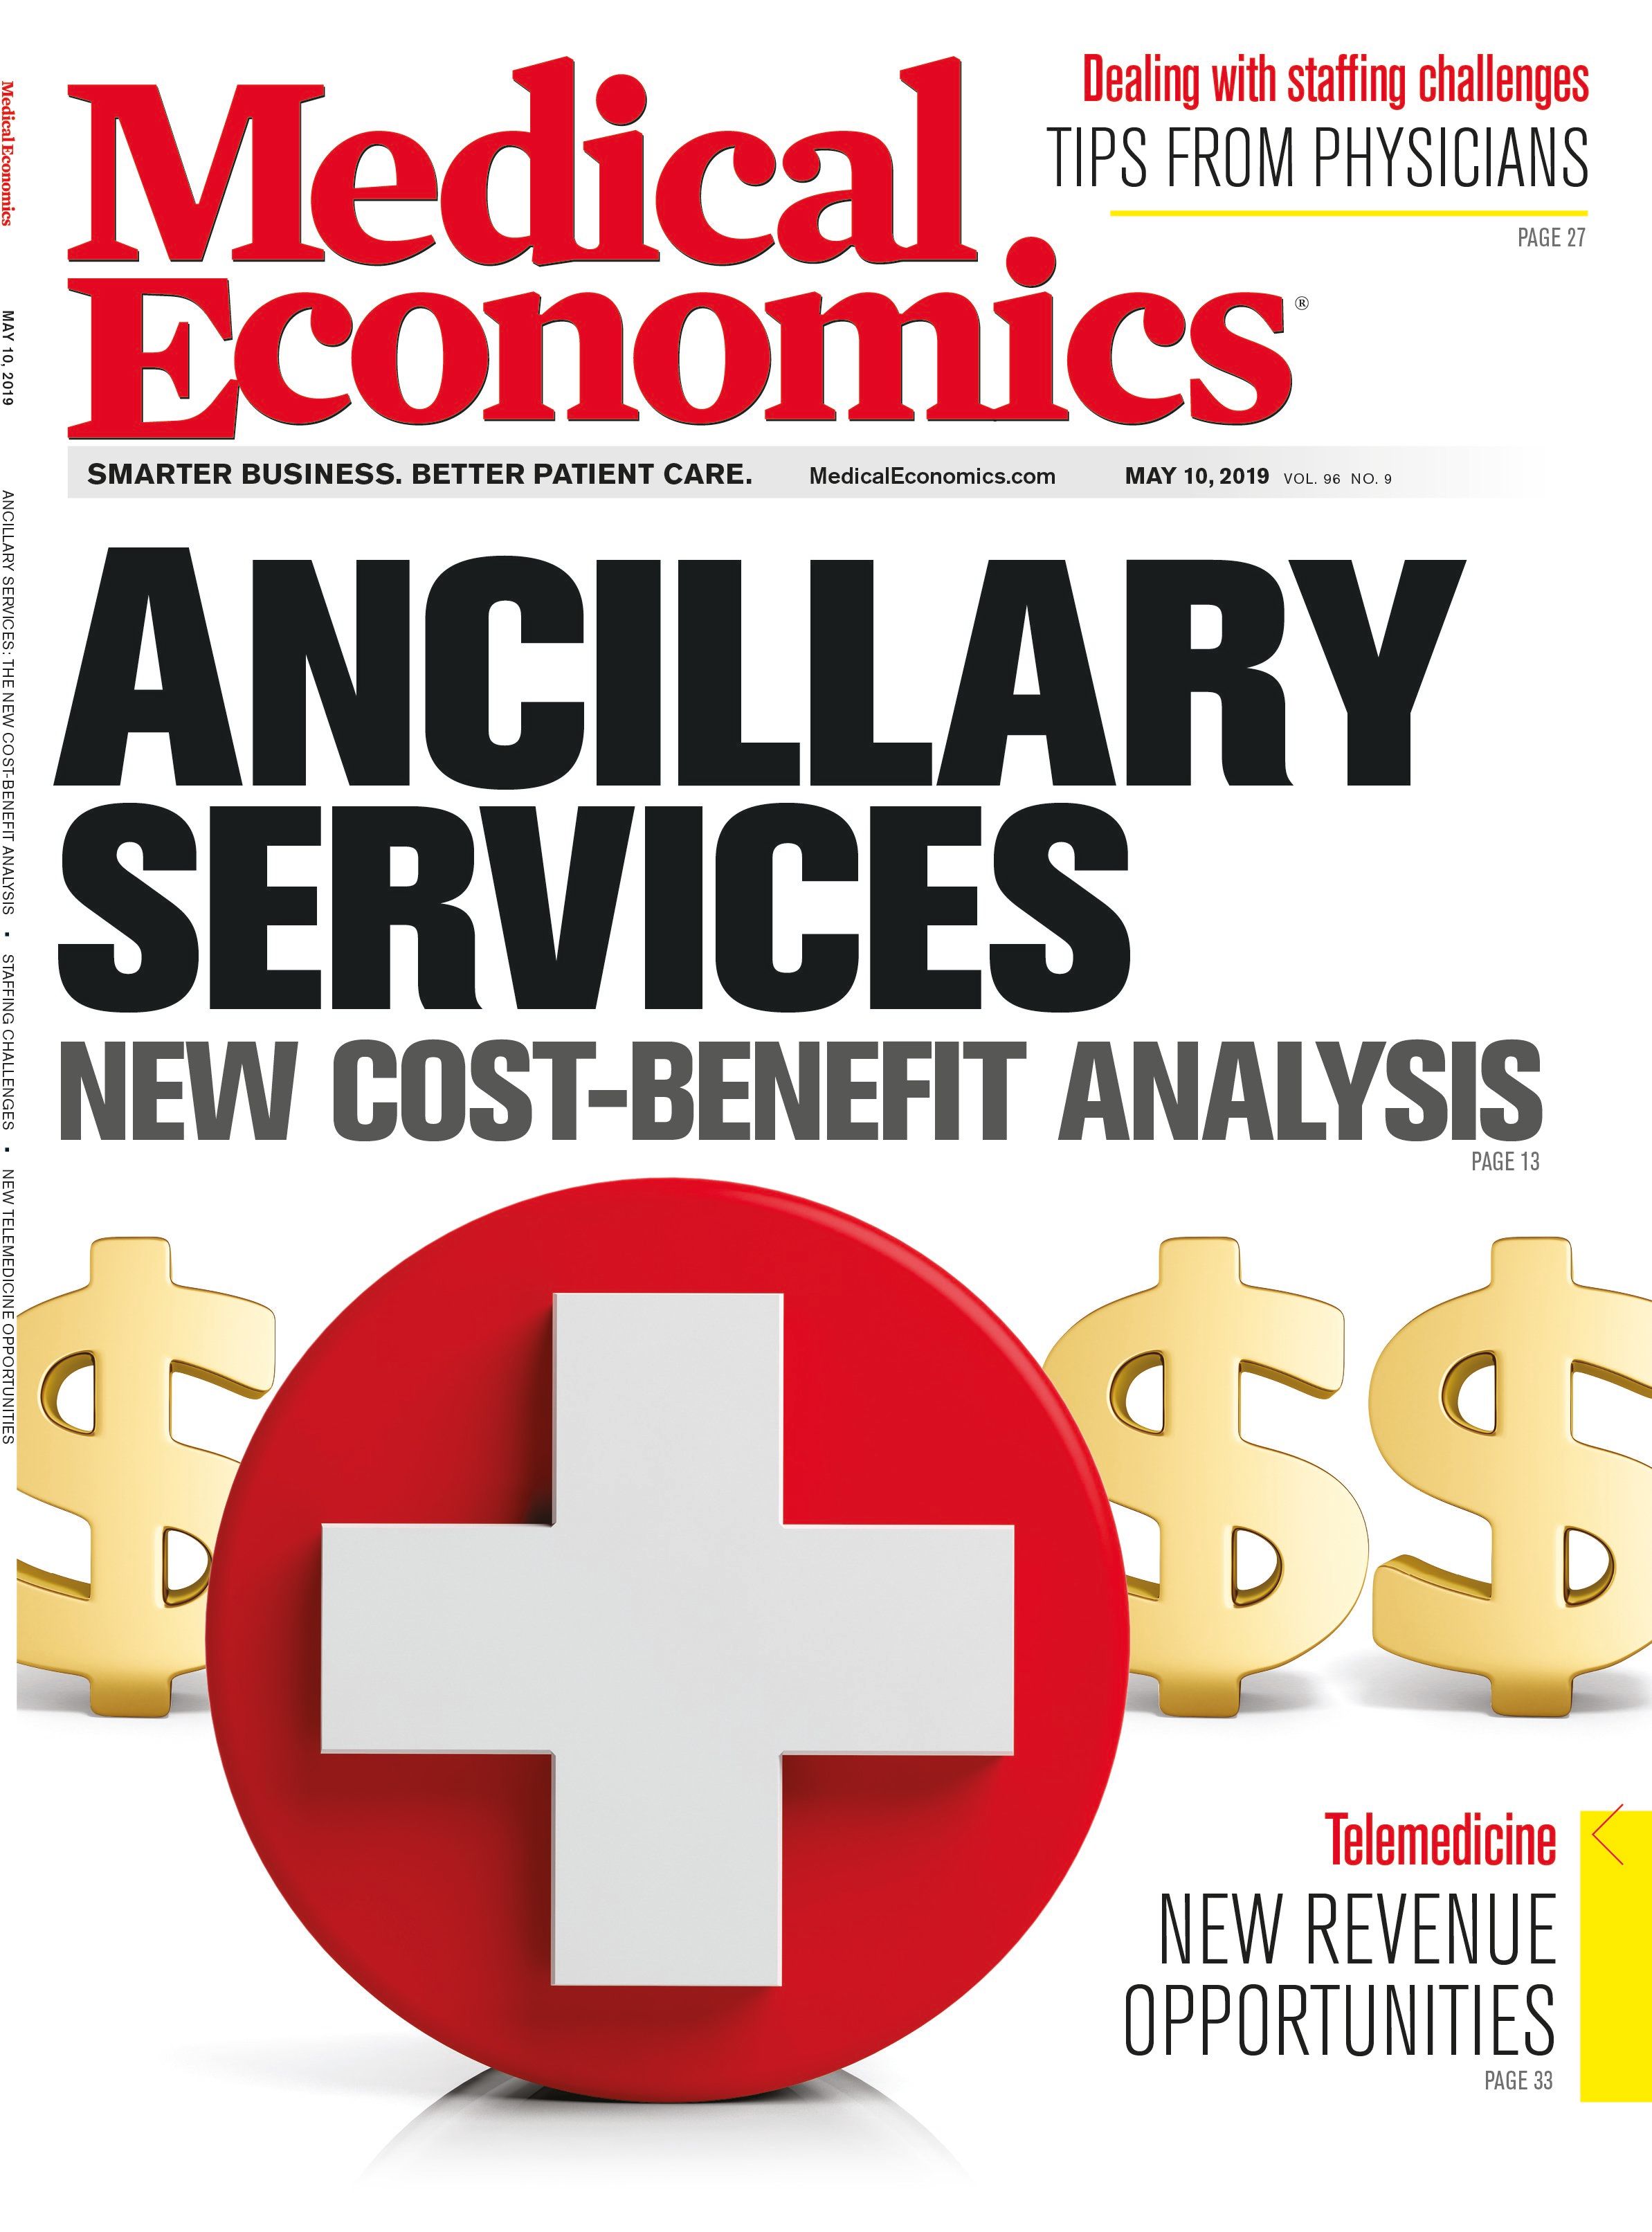 Ancillary services: A new cost-benefit analysis